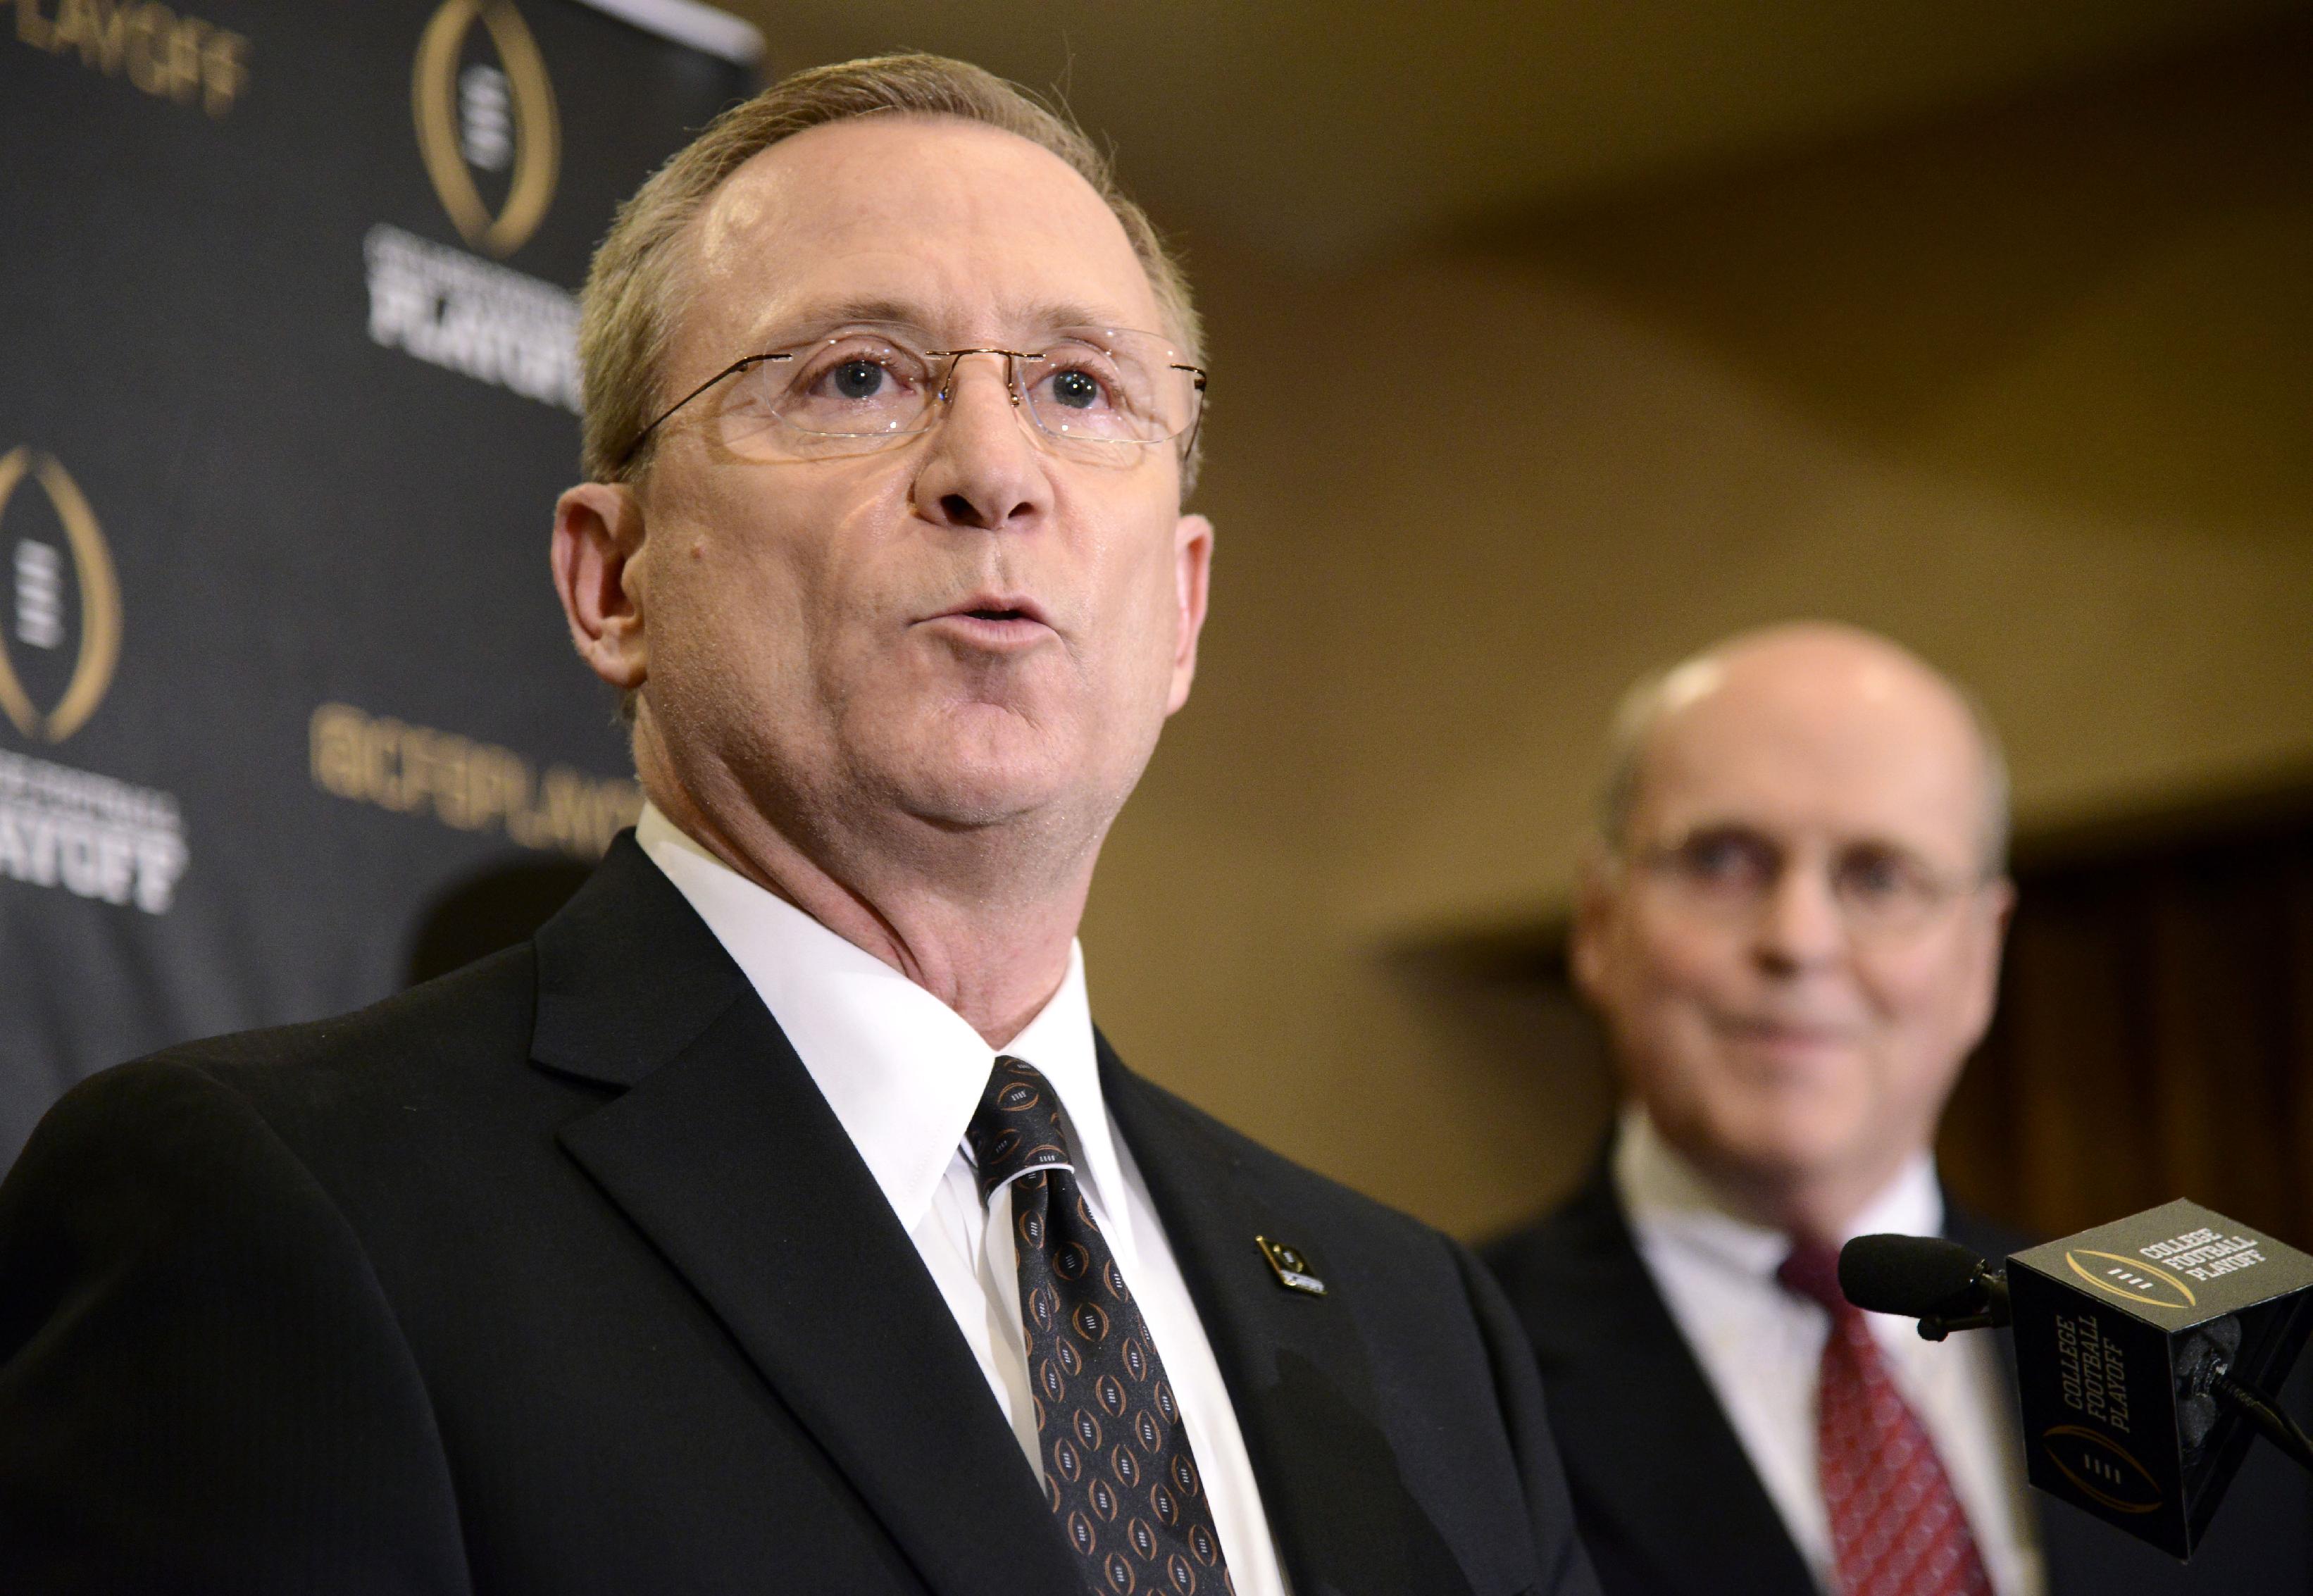 FILE - In this Oct. 28, 2014, file photo, Jeff Long, left, chair of the college football playoff selection committee, speaks to the media about the first NCAA College Football Playoff rankings as Bill Hancock, executive director of the committee, stands near during a news conferenc in Grapevine, Texas. The College Football Playoff selection committee will reveal its final top 25 rankings and set the four-team field for the College Football Playoff on Sunday. (AP Photo/Tim Sharp, File)